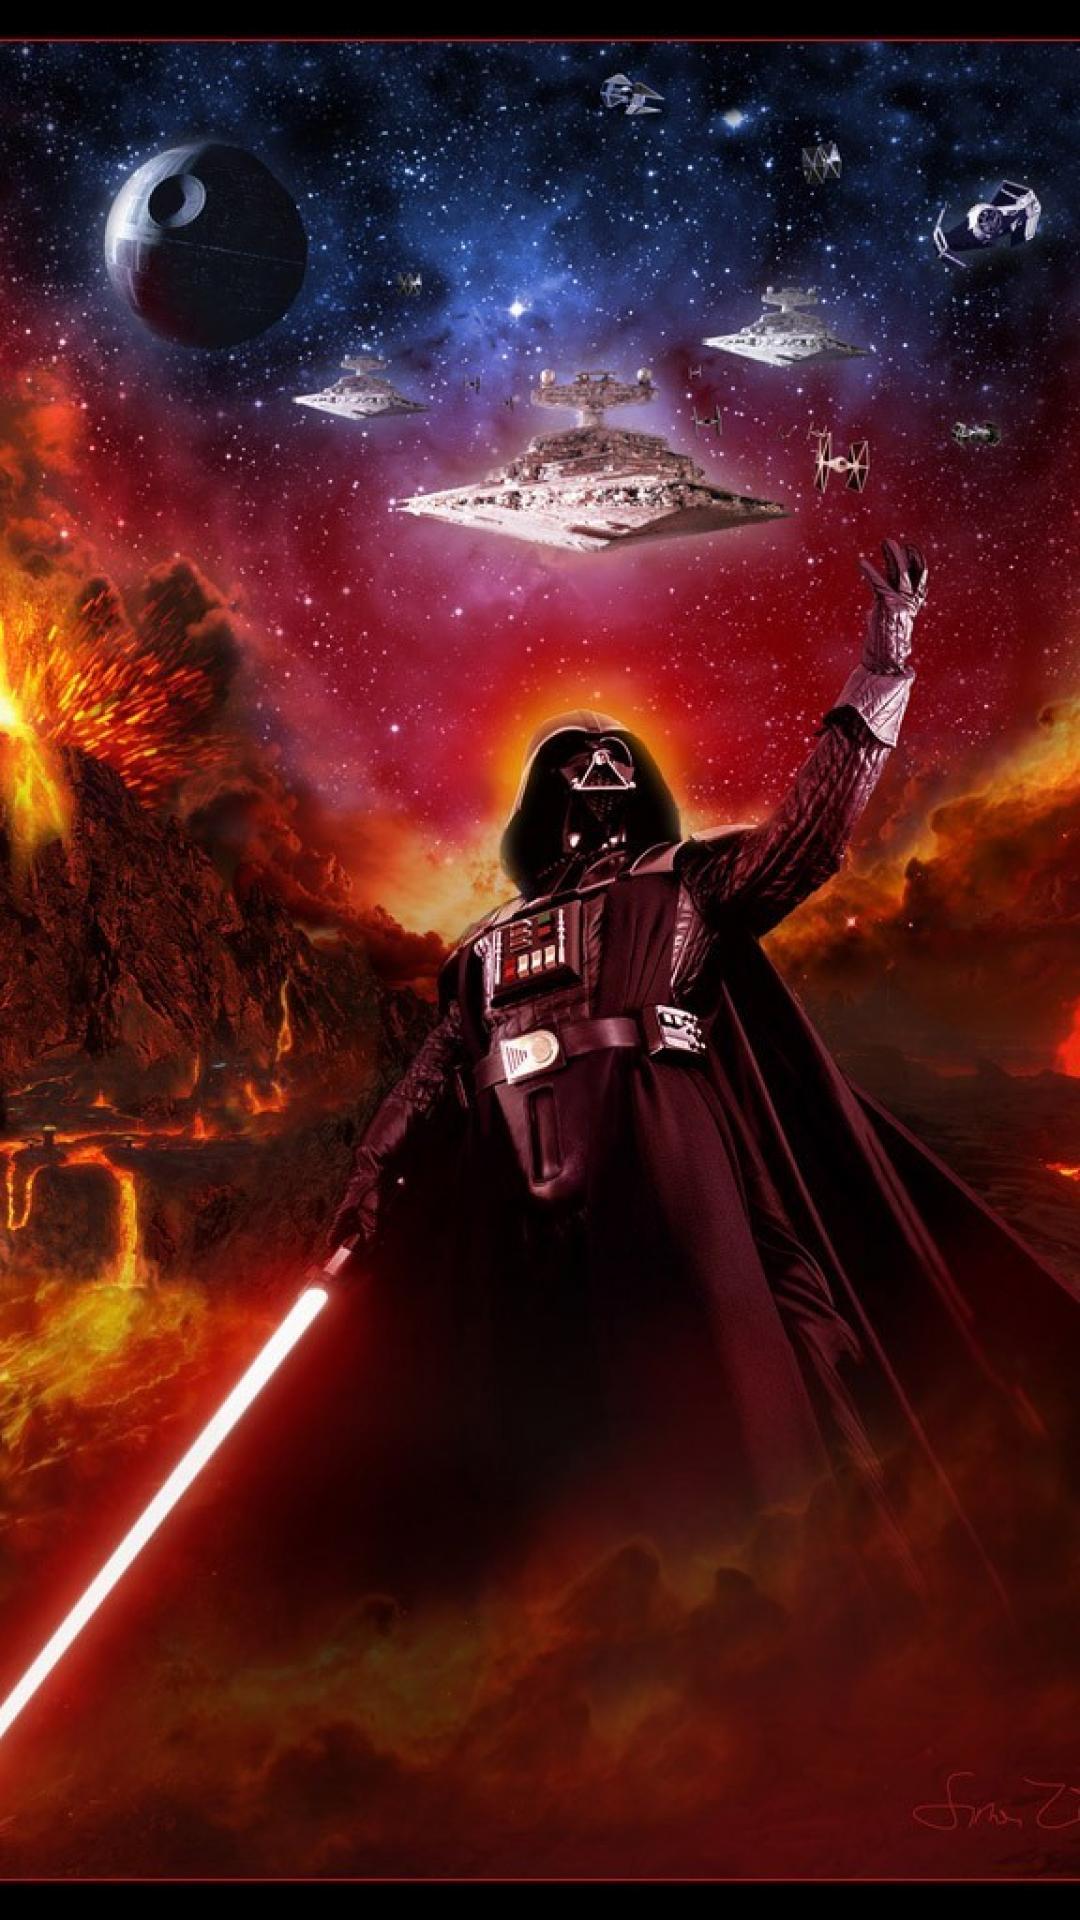 Sith Star Wars Iphone Wallpapers Top Free Sith Star Wars Iphone